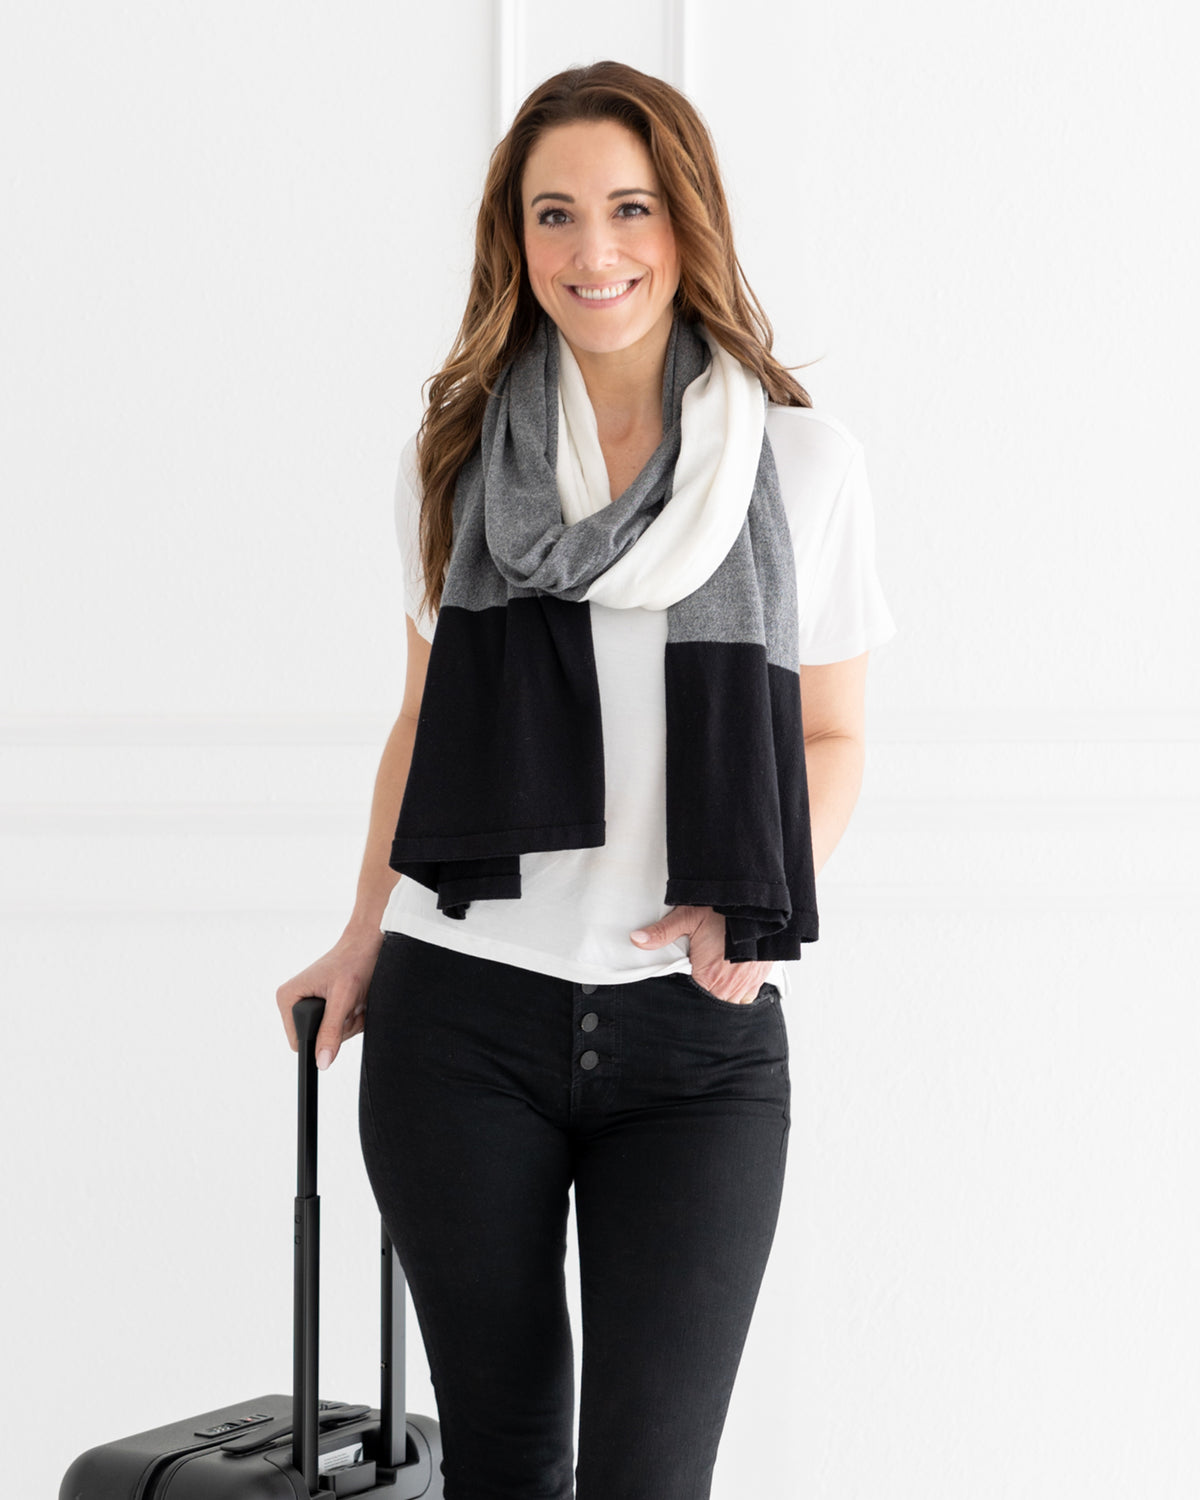 Woman wearing the Dreamsoft Travel Scarf in Gray Colorblock which is a black, gray and cream scarf, pulling a suitcase smiling at camera